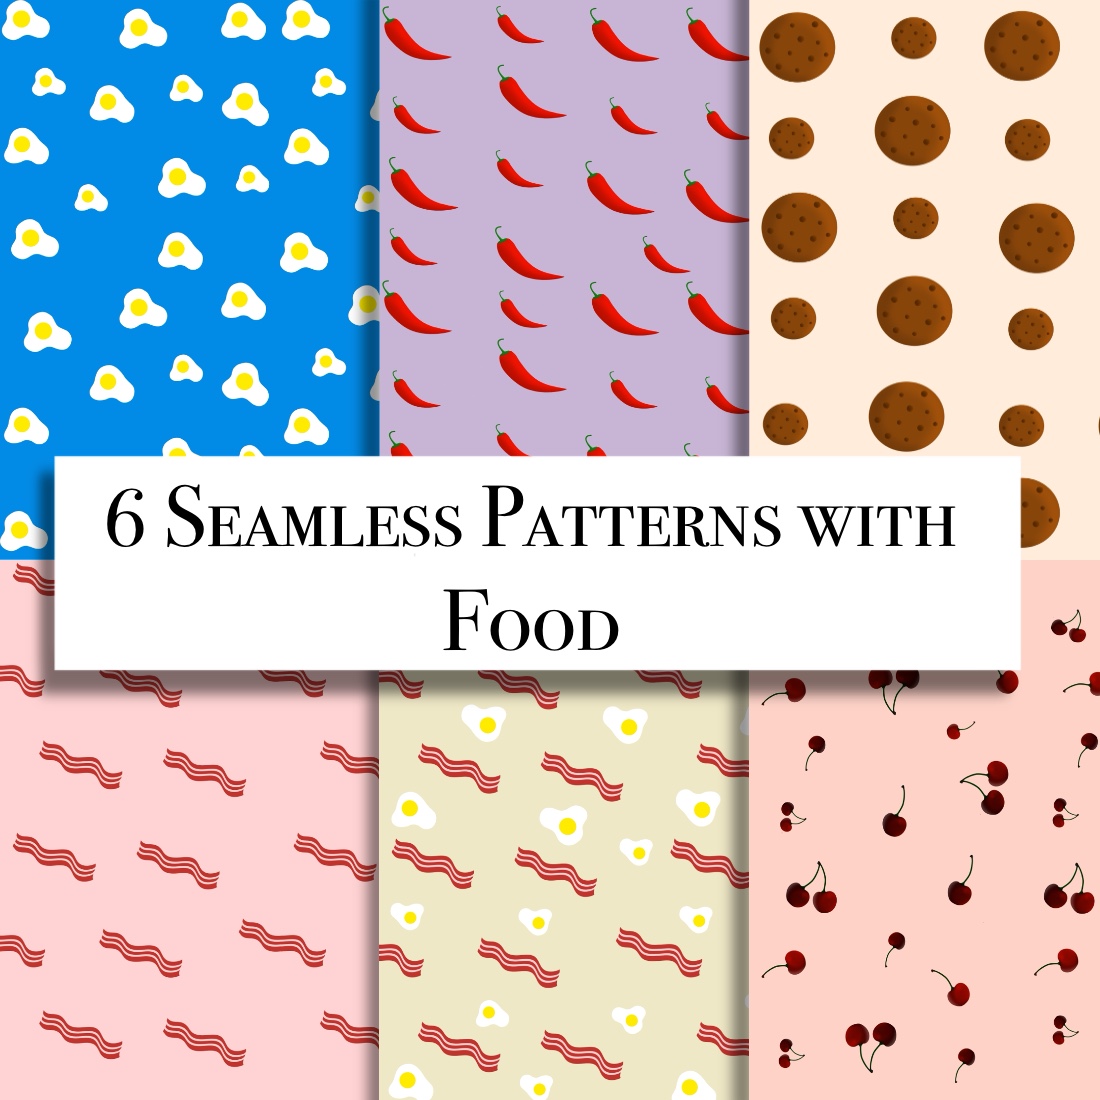 6 seamless patterns with food cover image.